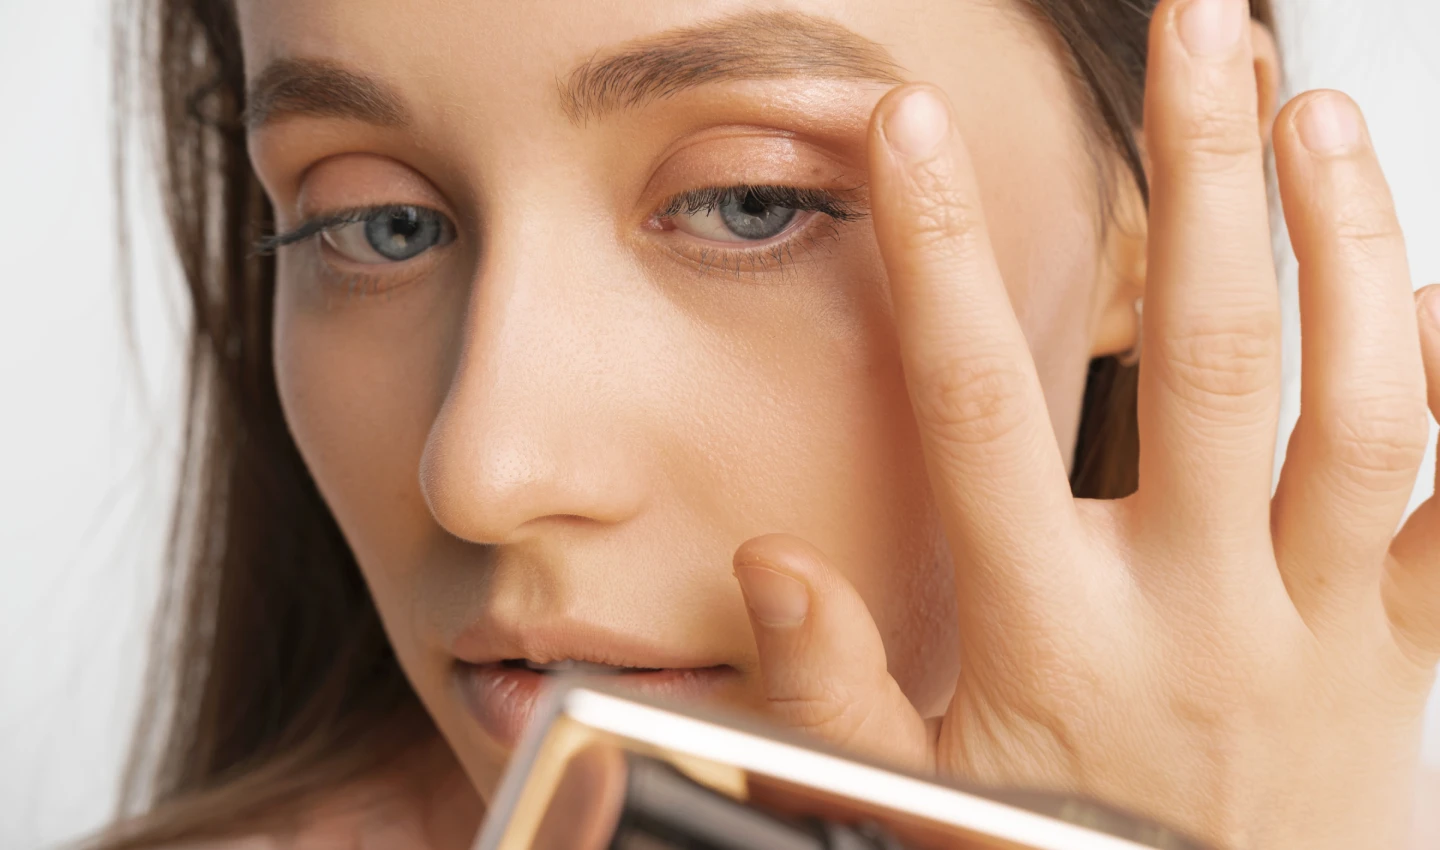 A woman with glowing skin applying a nude-colored eye shadow with her index finger above her eyes, showcasing the ease and simplicity of using neutral eye shadow palettes to create an effortlessly elegant eye makeup look.